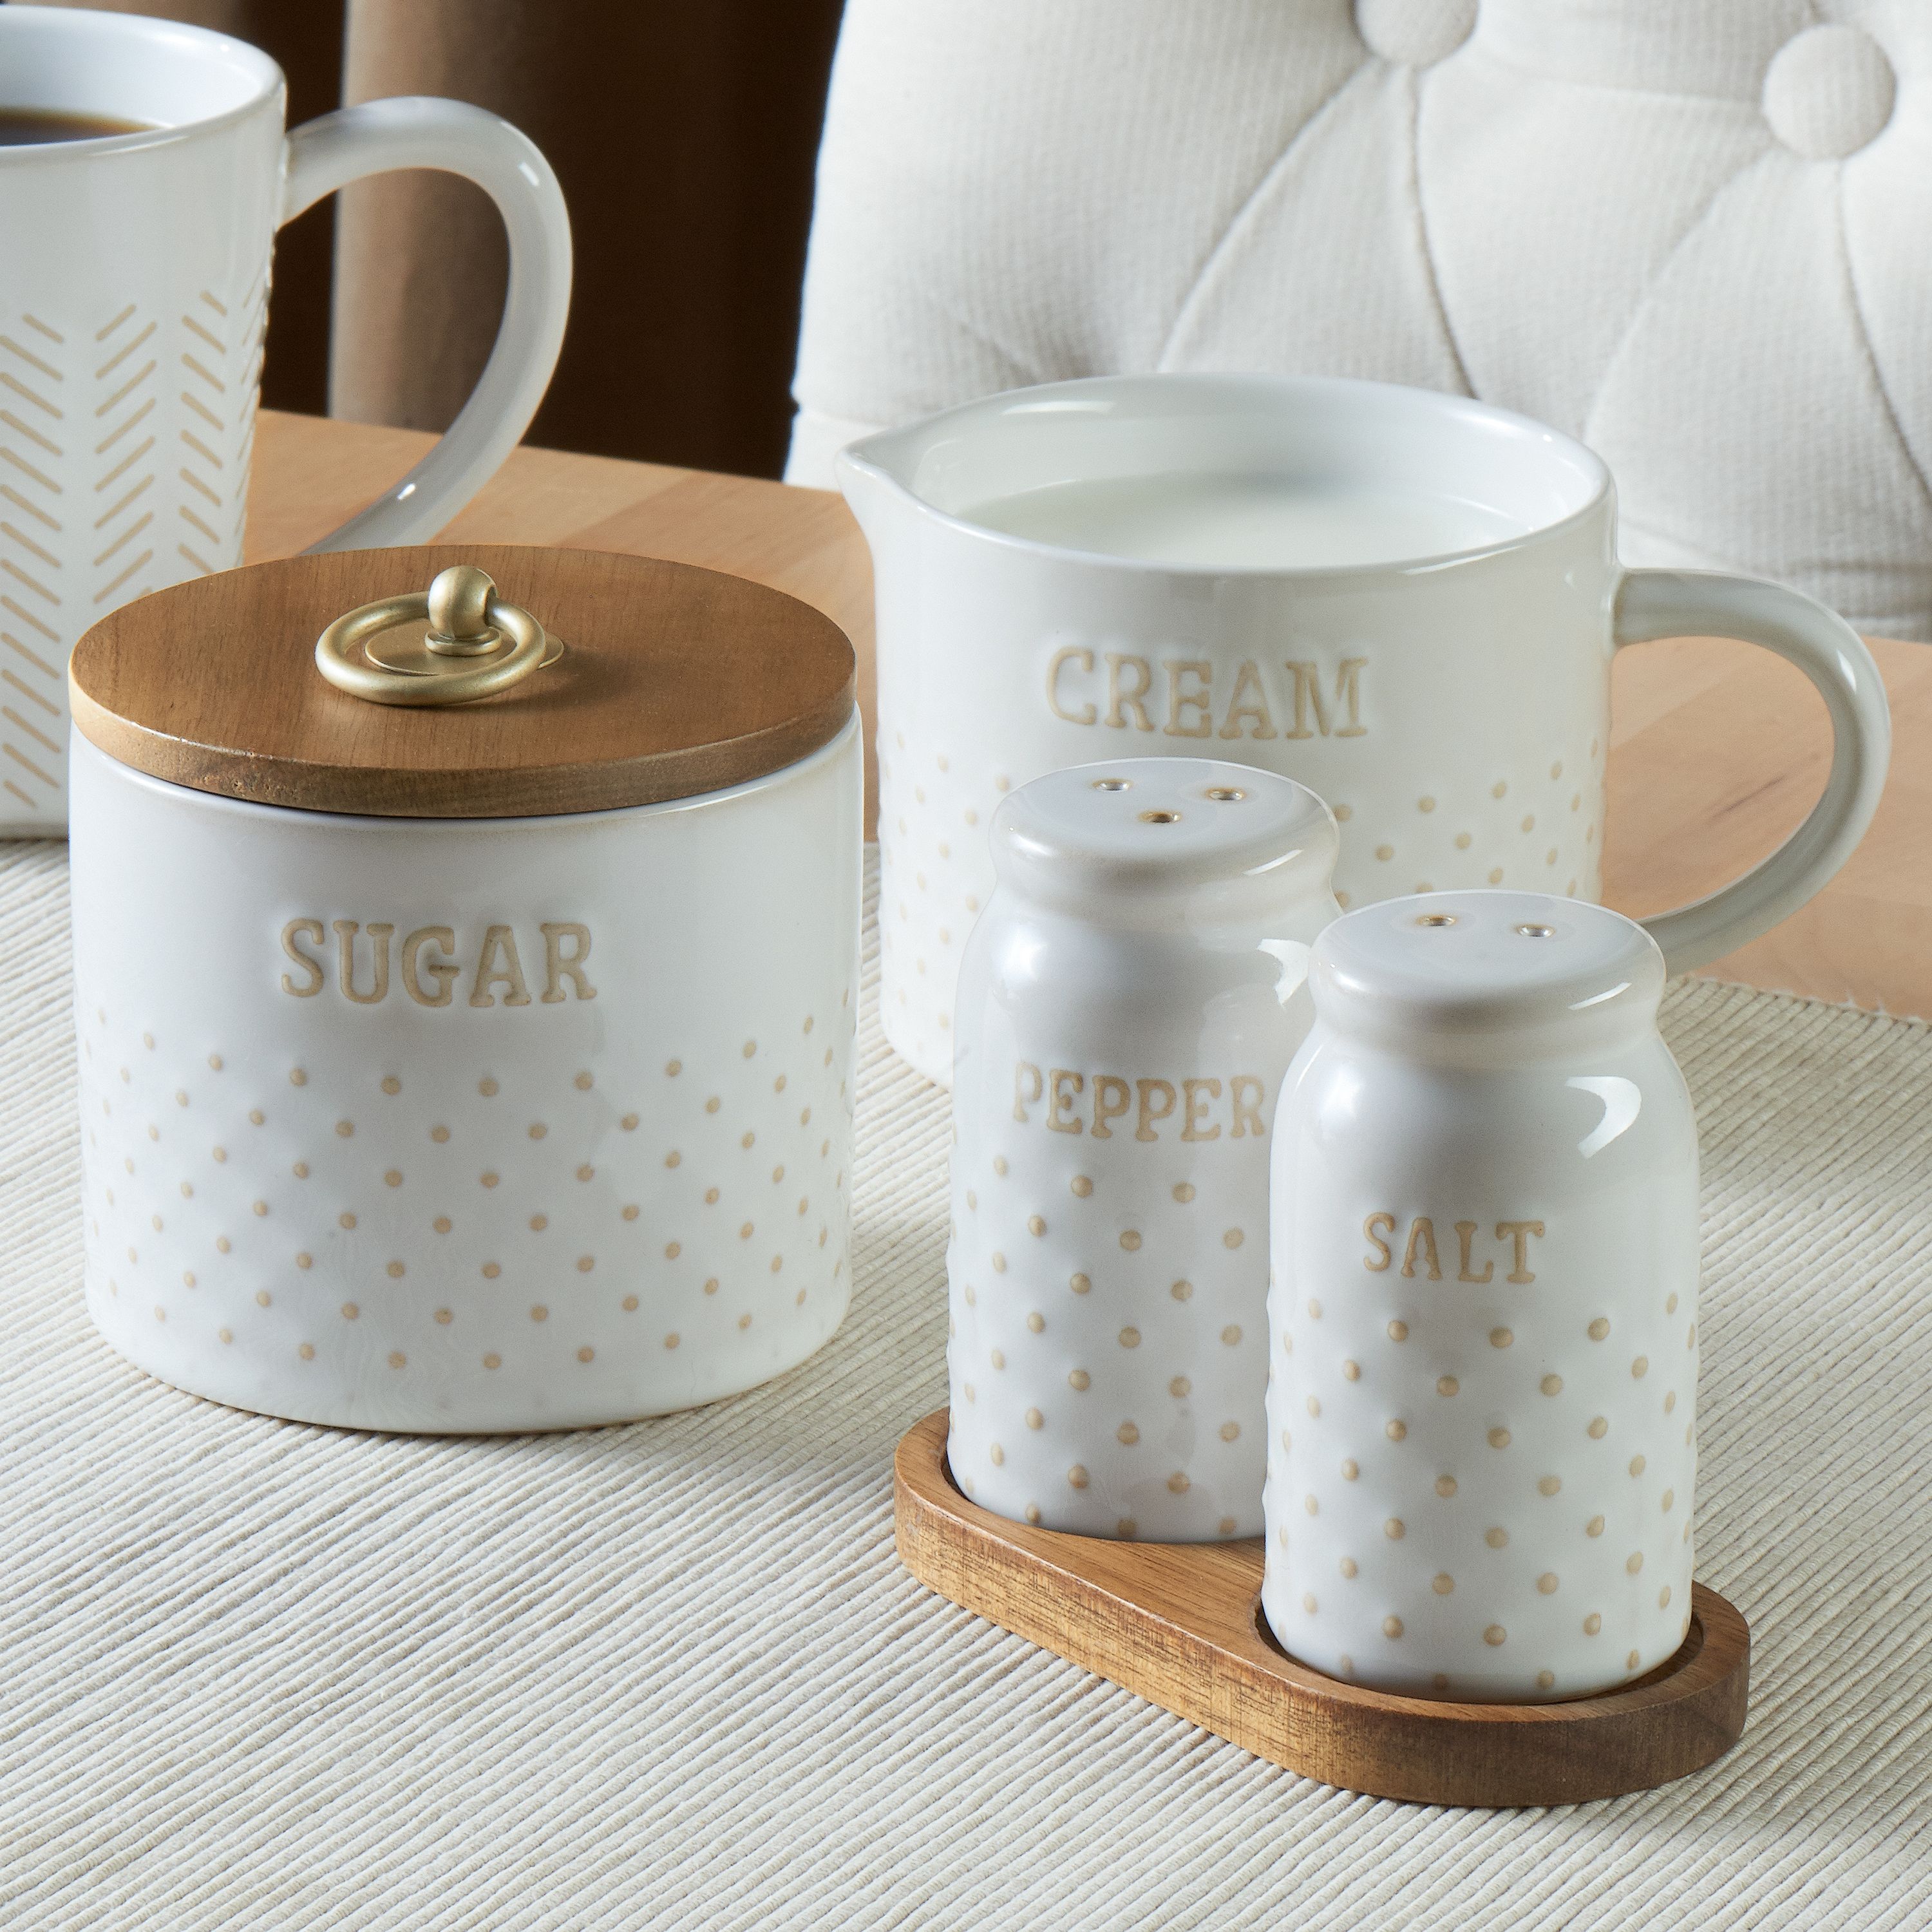 Better Homes & Gardens Farmhouse 4-Piece Dotted Sugar Cannister, Creamer, and Salt and Pepper Shaker Set in White - image 2 of 6